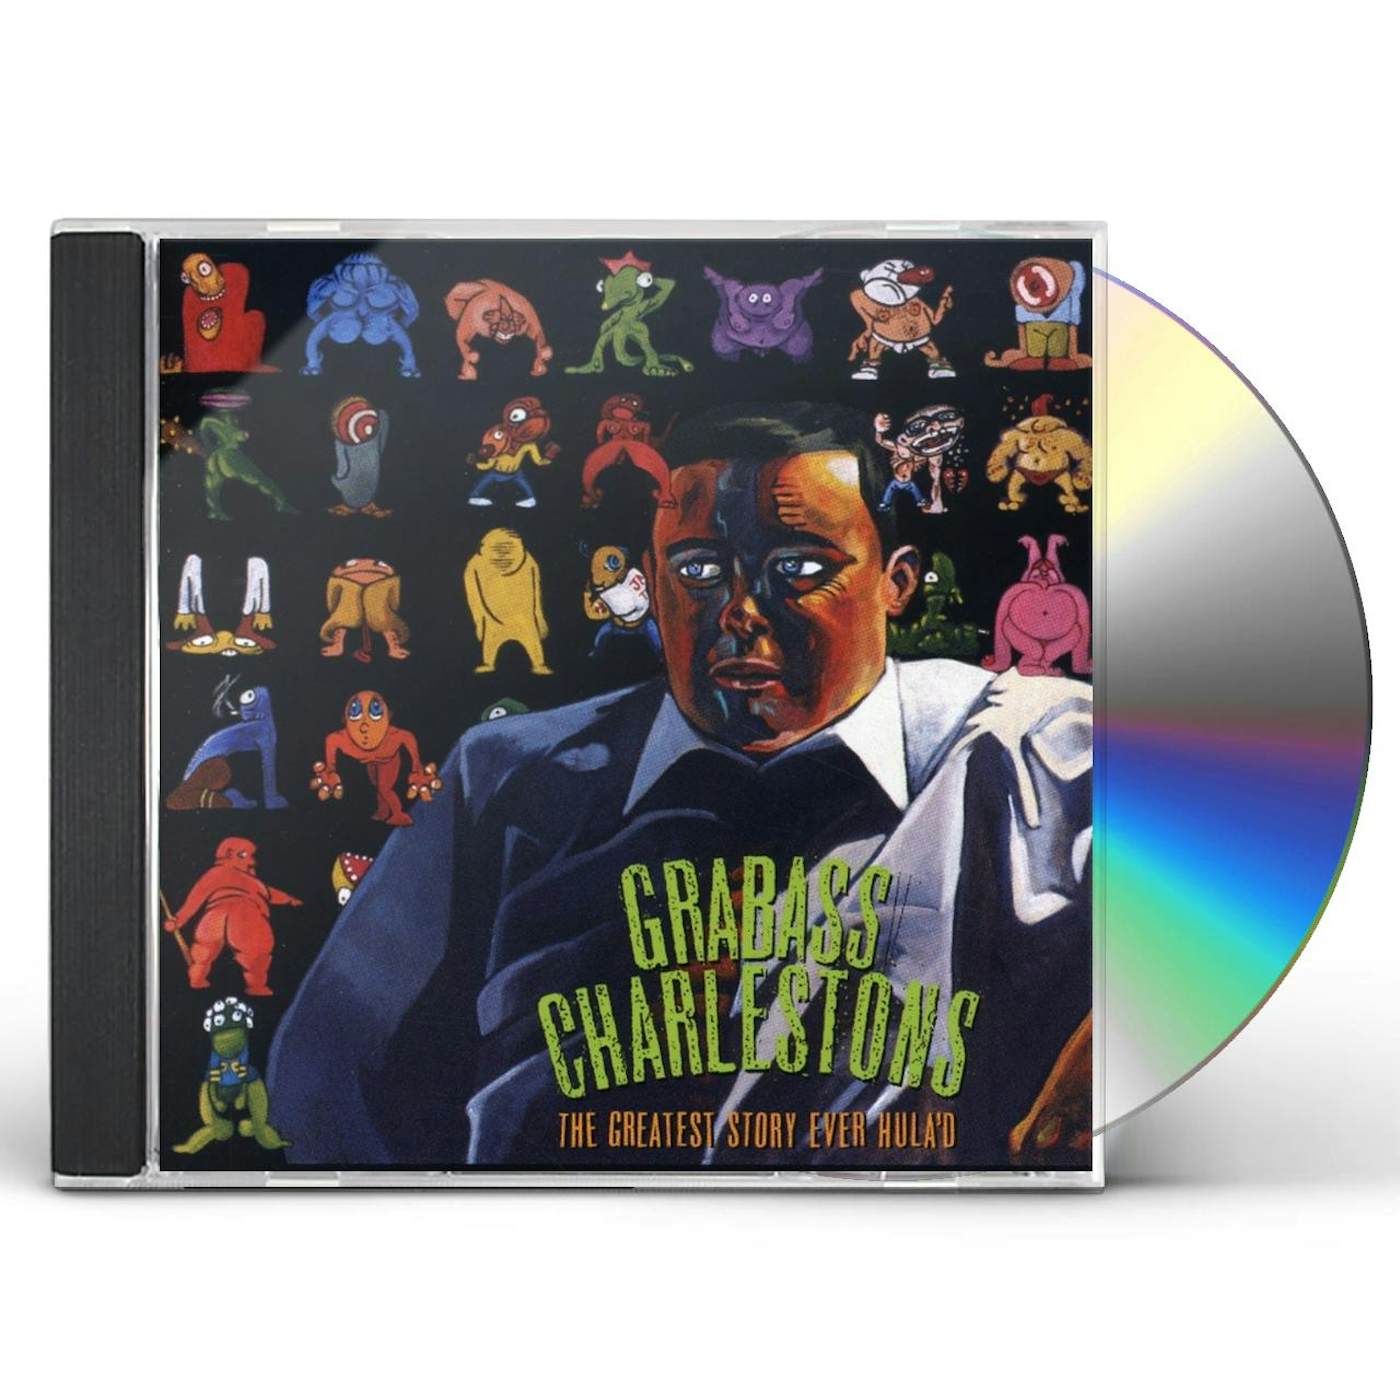 Grabass Charlestons GREATEST STORY EVER HULA'D CD